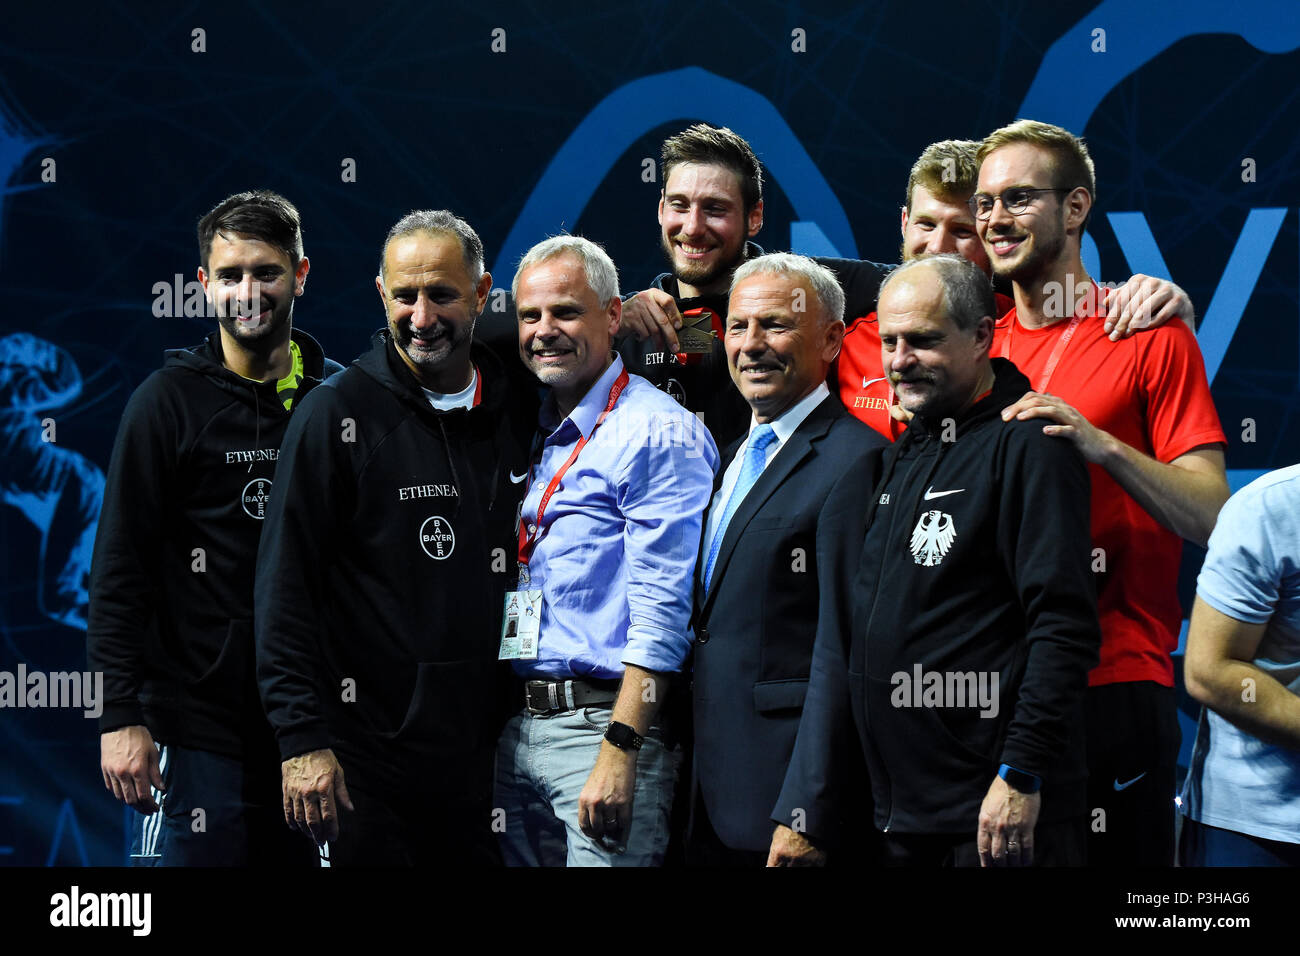 Novi Sad,Serbia. 18th June, 2018.  European fencing championship for mens saber awarding medals Hartung Max from Germany won the first place,second place won Ibragimov Kamil from Russia,third places wons  Bazadze Sandro from Georgia and Danilenko Dmitriy from Russia  photo Nenad Mihajlovic Stock Photo